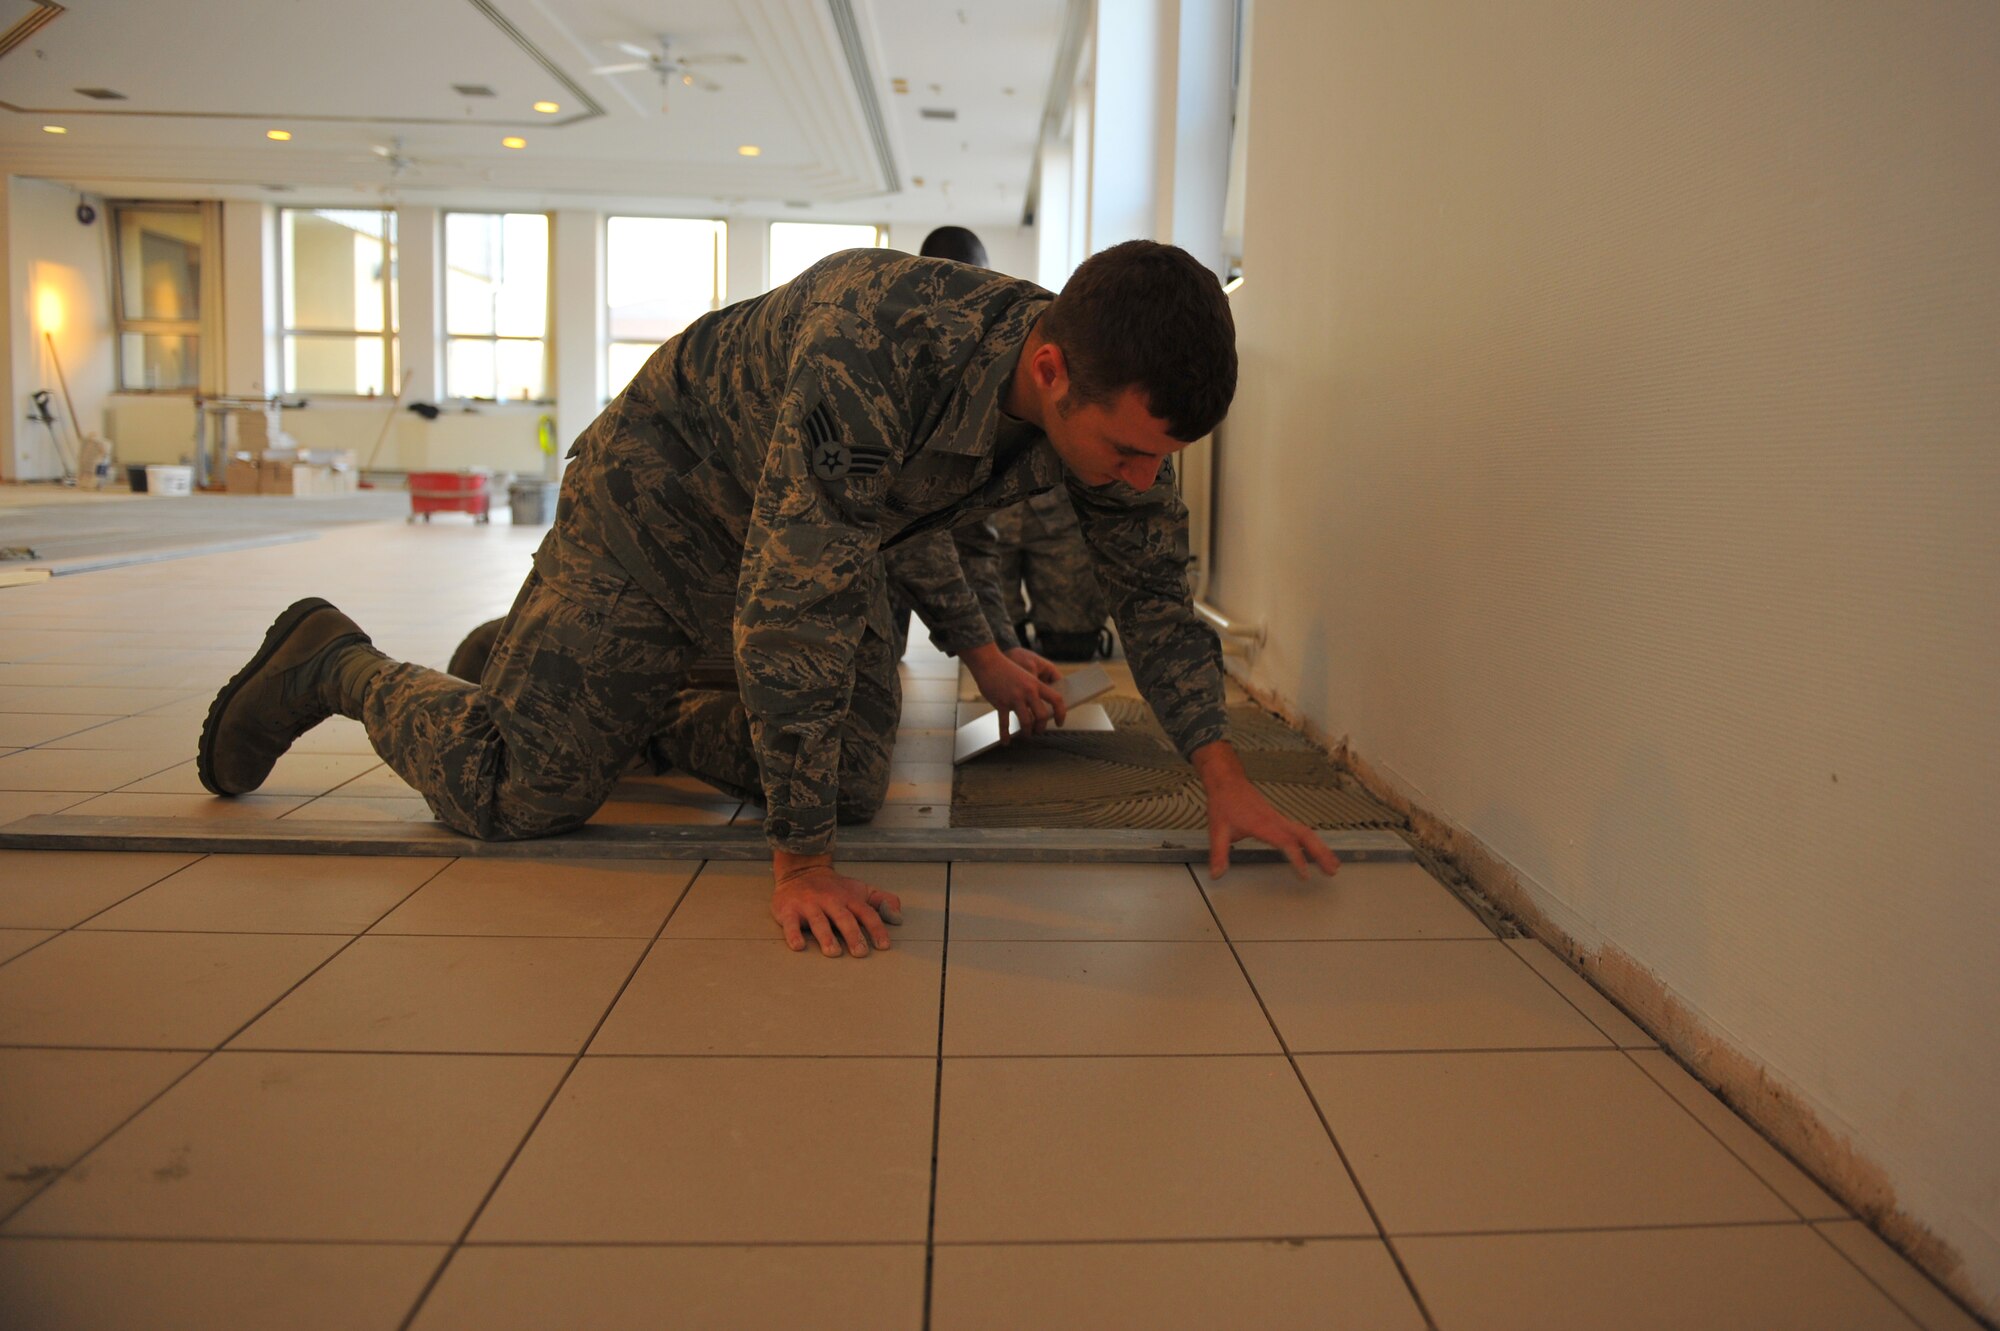 SPANGDAHLEM AIR BASE, Germany – Senior Airman Marshall Browning, 52nd Civil Engineer Squadron structures journeyman, aligns tiles before the adhesive dries inside the Mosel Dining Facility here Nov. 16. The 52nd CES is renovating the facility, to include, new flooring, paint, service line and storage facilities. Completion of the facility is scheduled for Jan. 15, 2012. (U.S. Air Force photo/Airman 1st Class Dillon Davis)